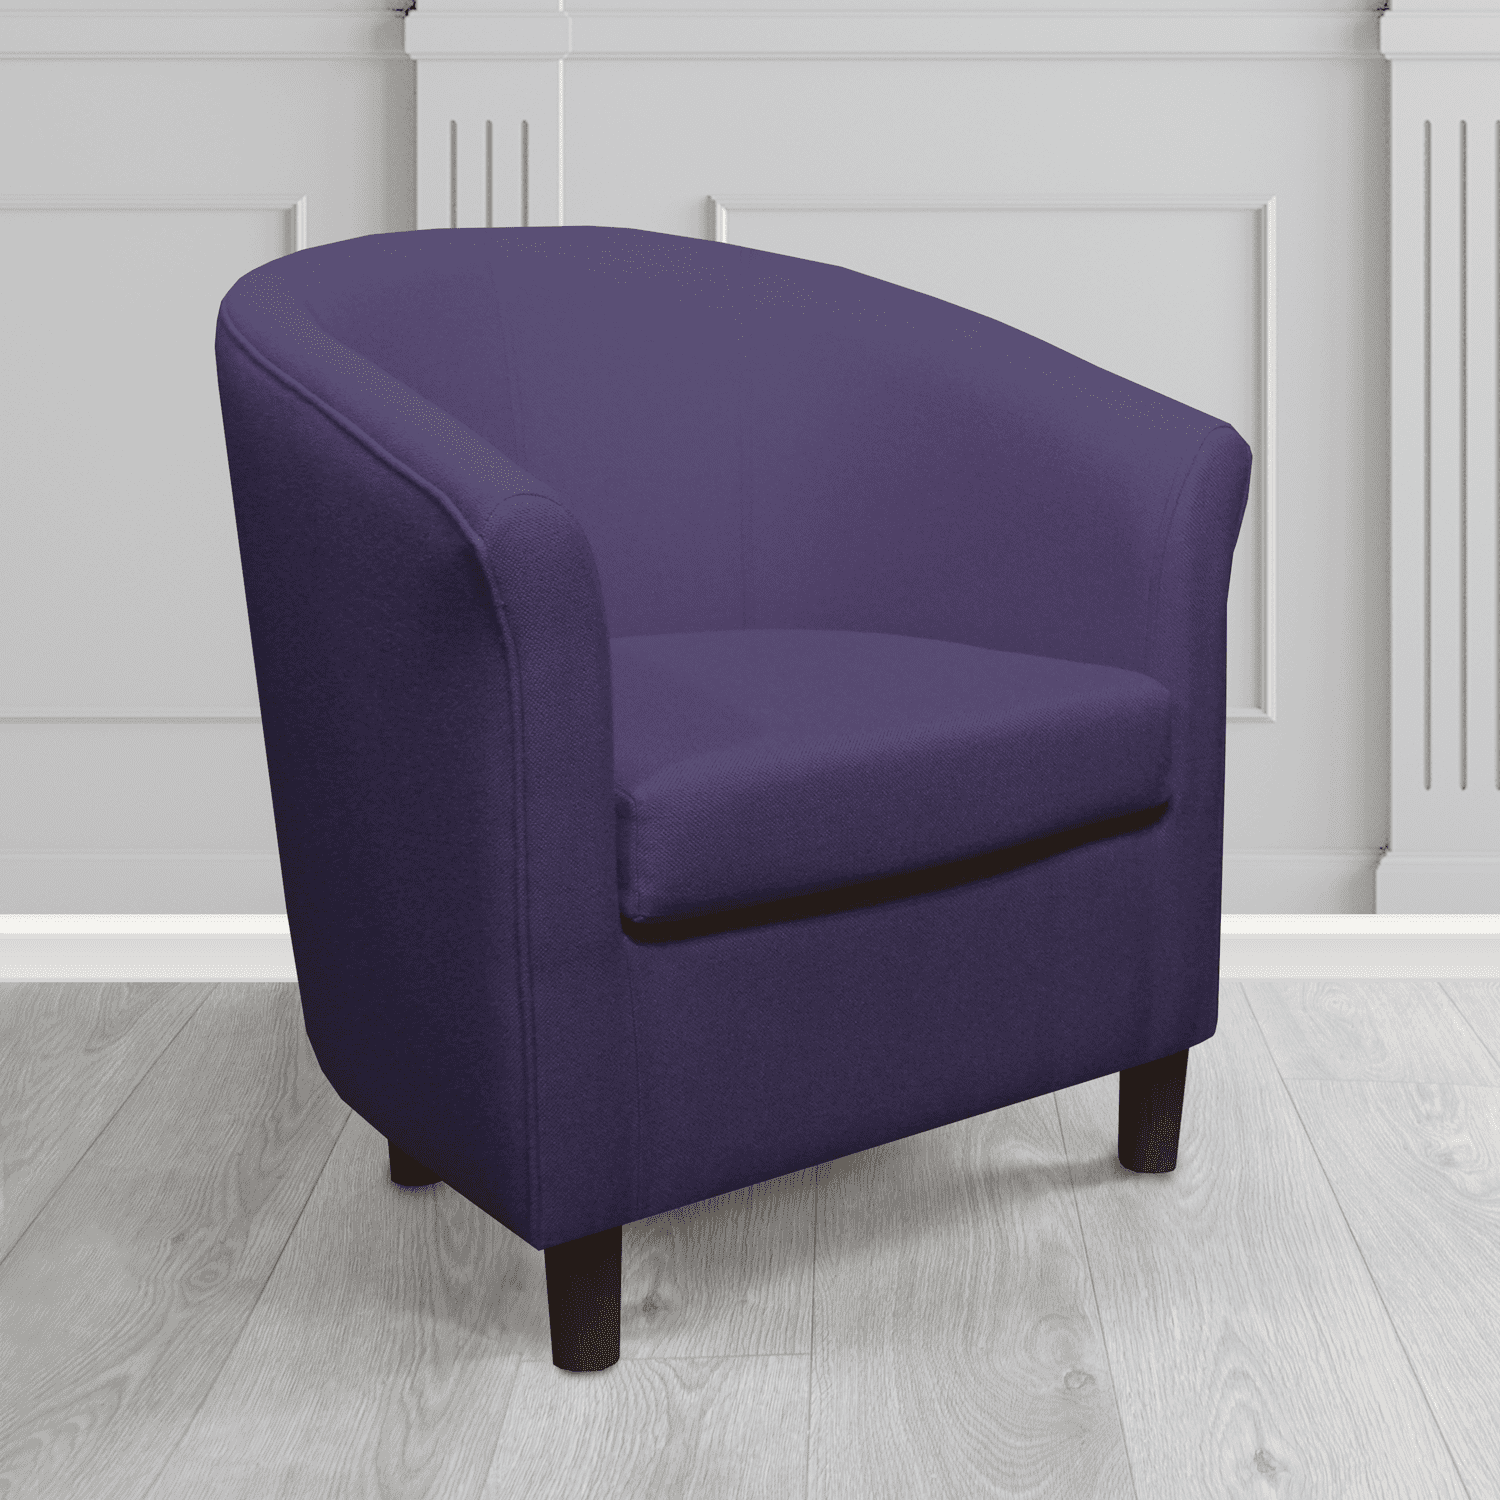 Tuscany Tub Chair in Mainline Plus Prudence IF250 Crib 5 Fabric - The Tub Chair Shop